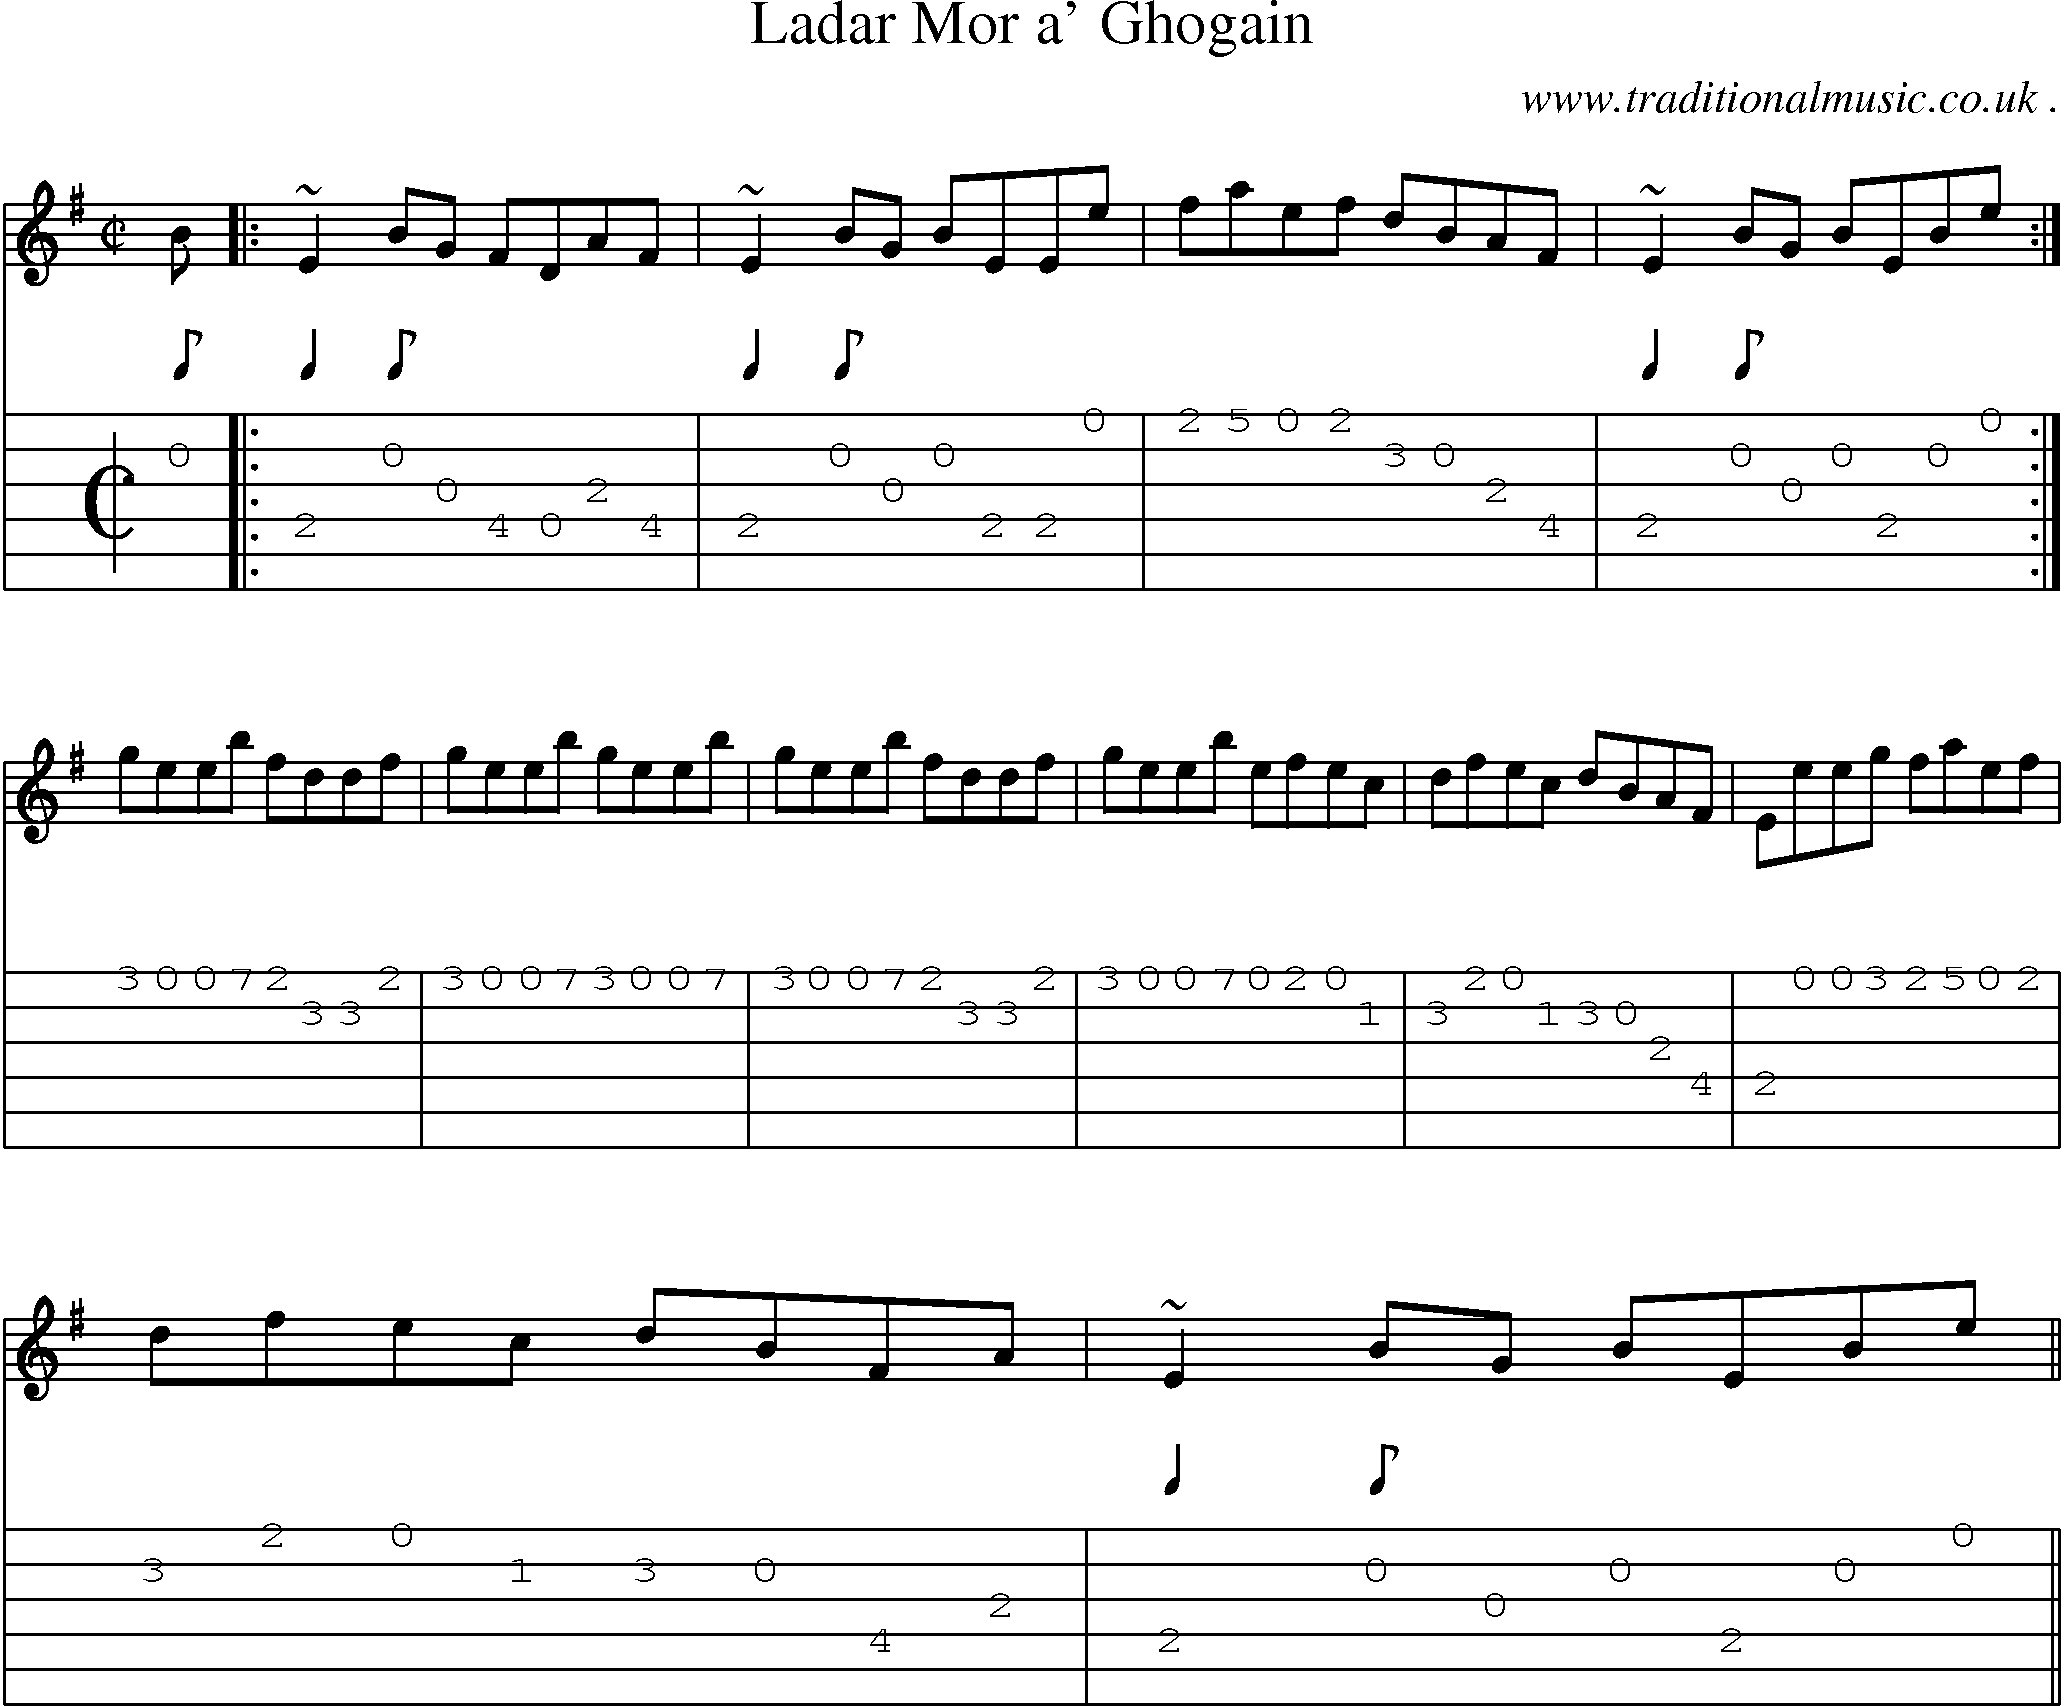 Sheet-music  score, Chords and Guitar Tabs for Ladar Mor A Ghogain